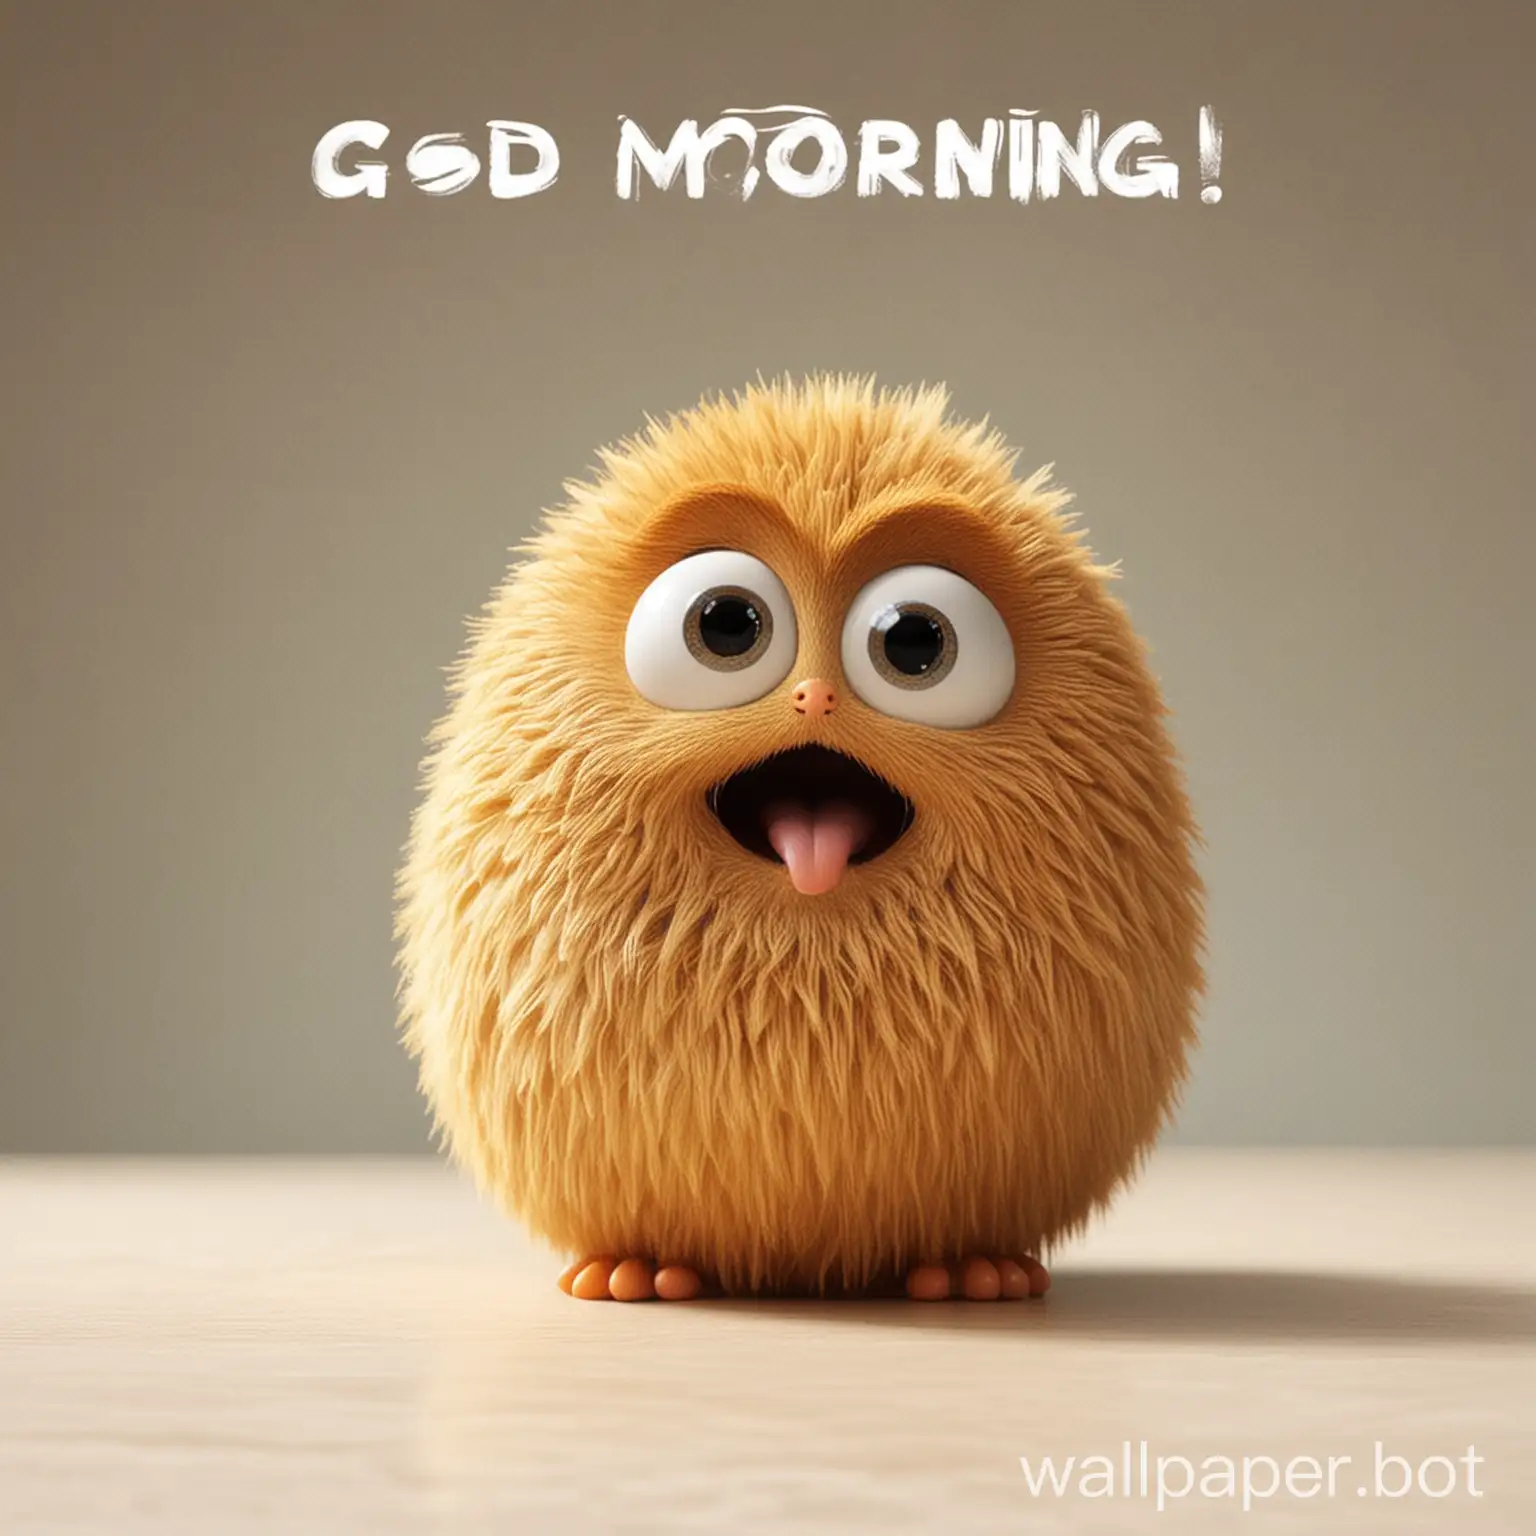 Cheerful-Animal-Friends-Exchanging-Friendly-Greetings-in-the-Morning